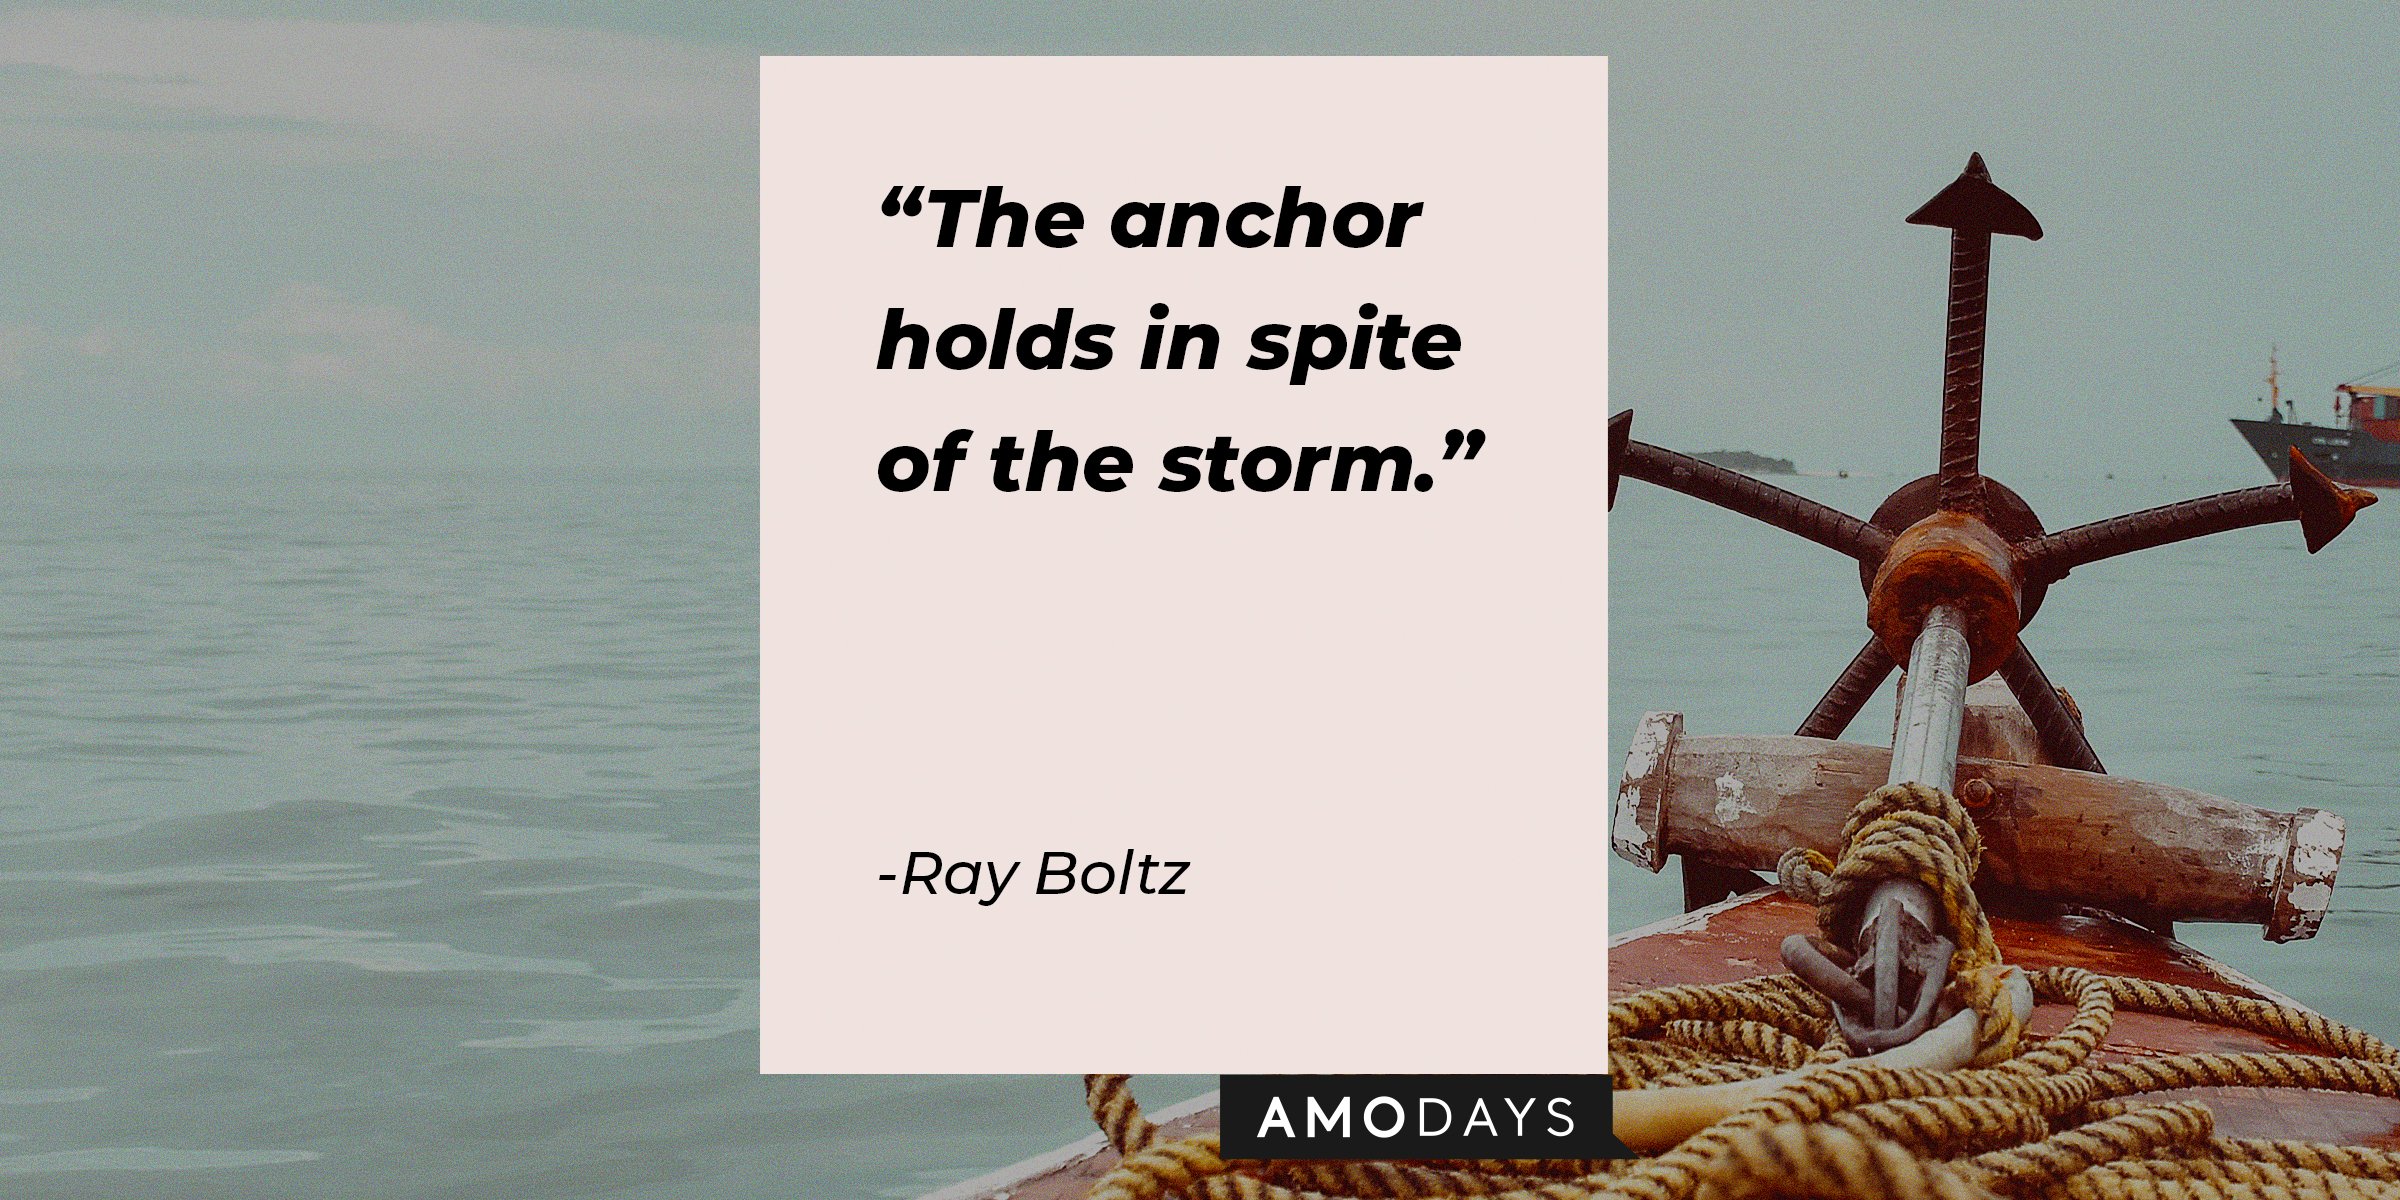 Unsplash | Photo of an anchor at sea with the quote, "The anchor holds in spite of the storm."